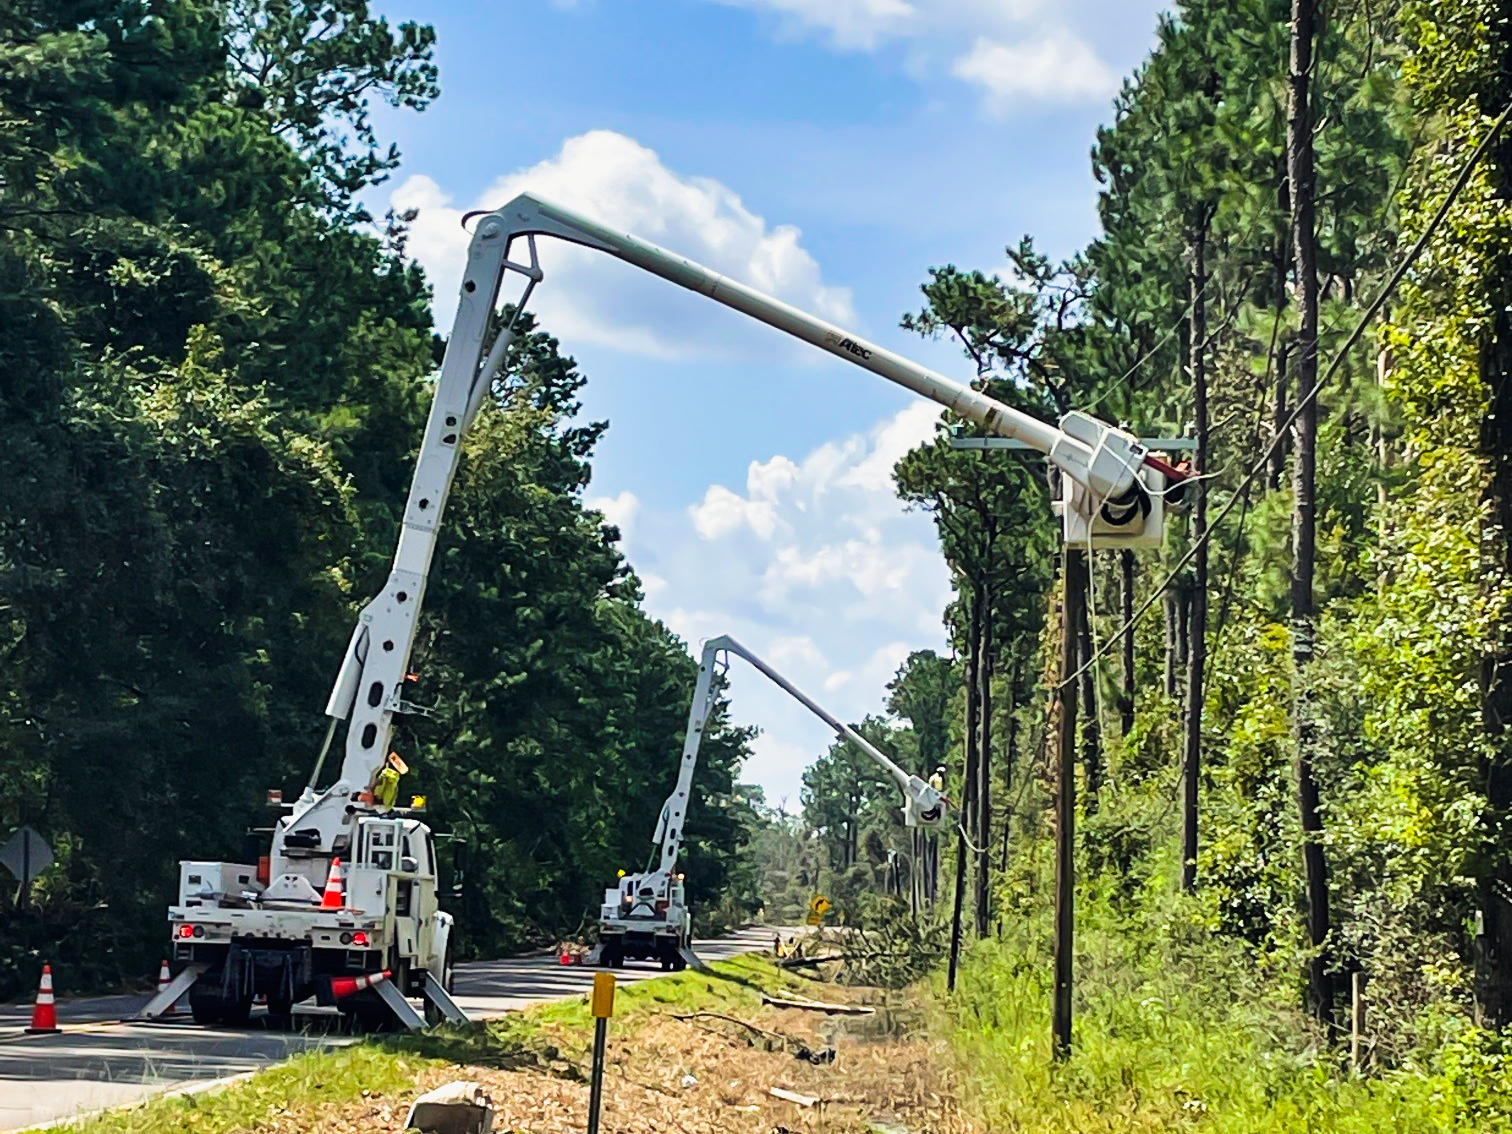 Two lineman work from lifted bucket trucks on power line poles along a heavily wooded highway